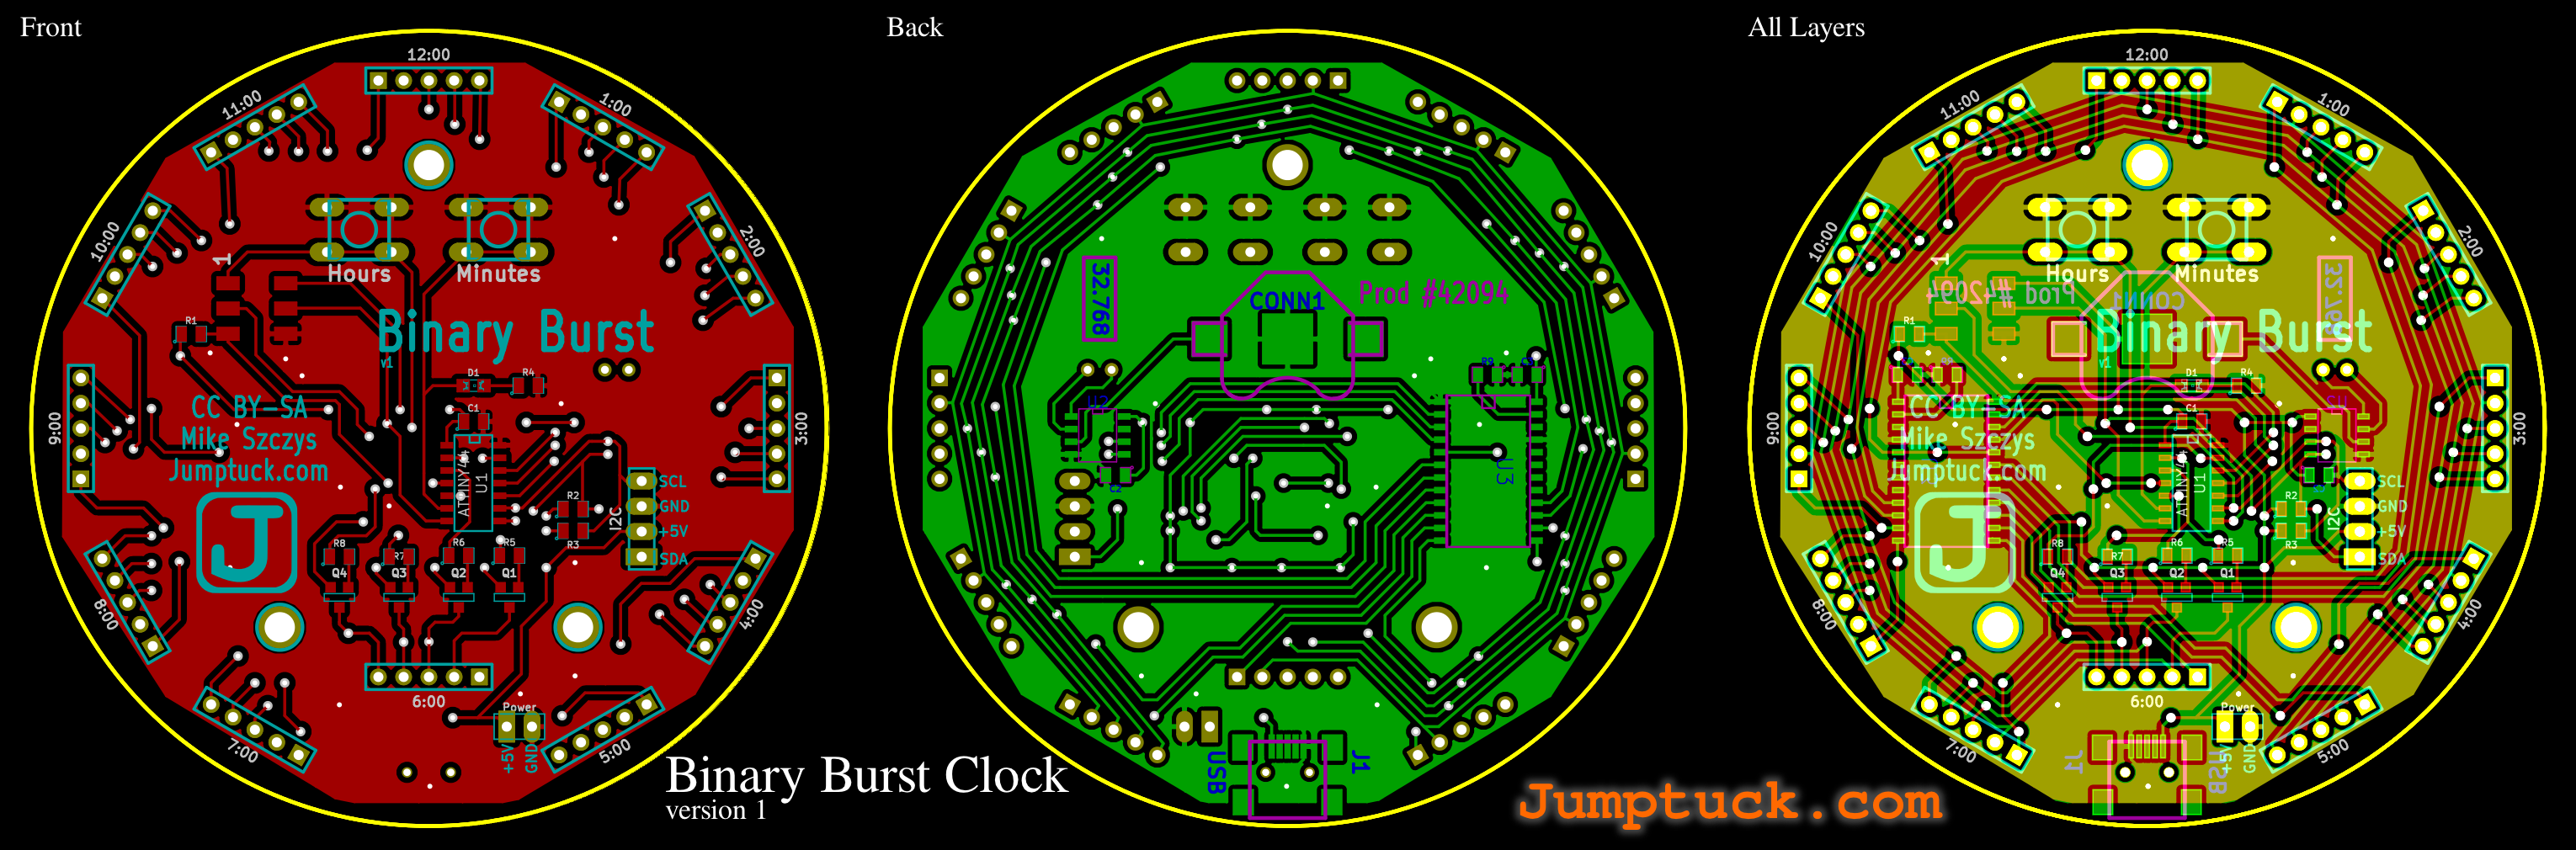 PCB order placed for Binary Burst Clock